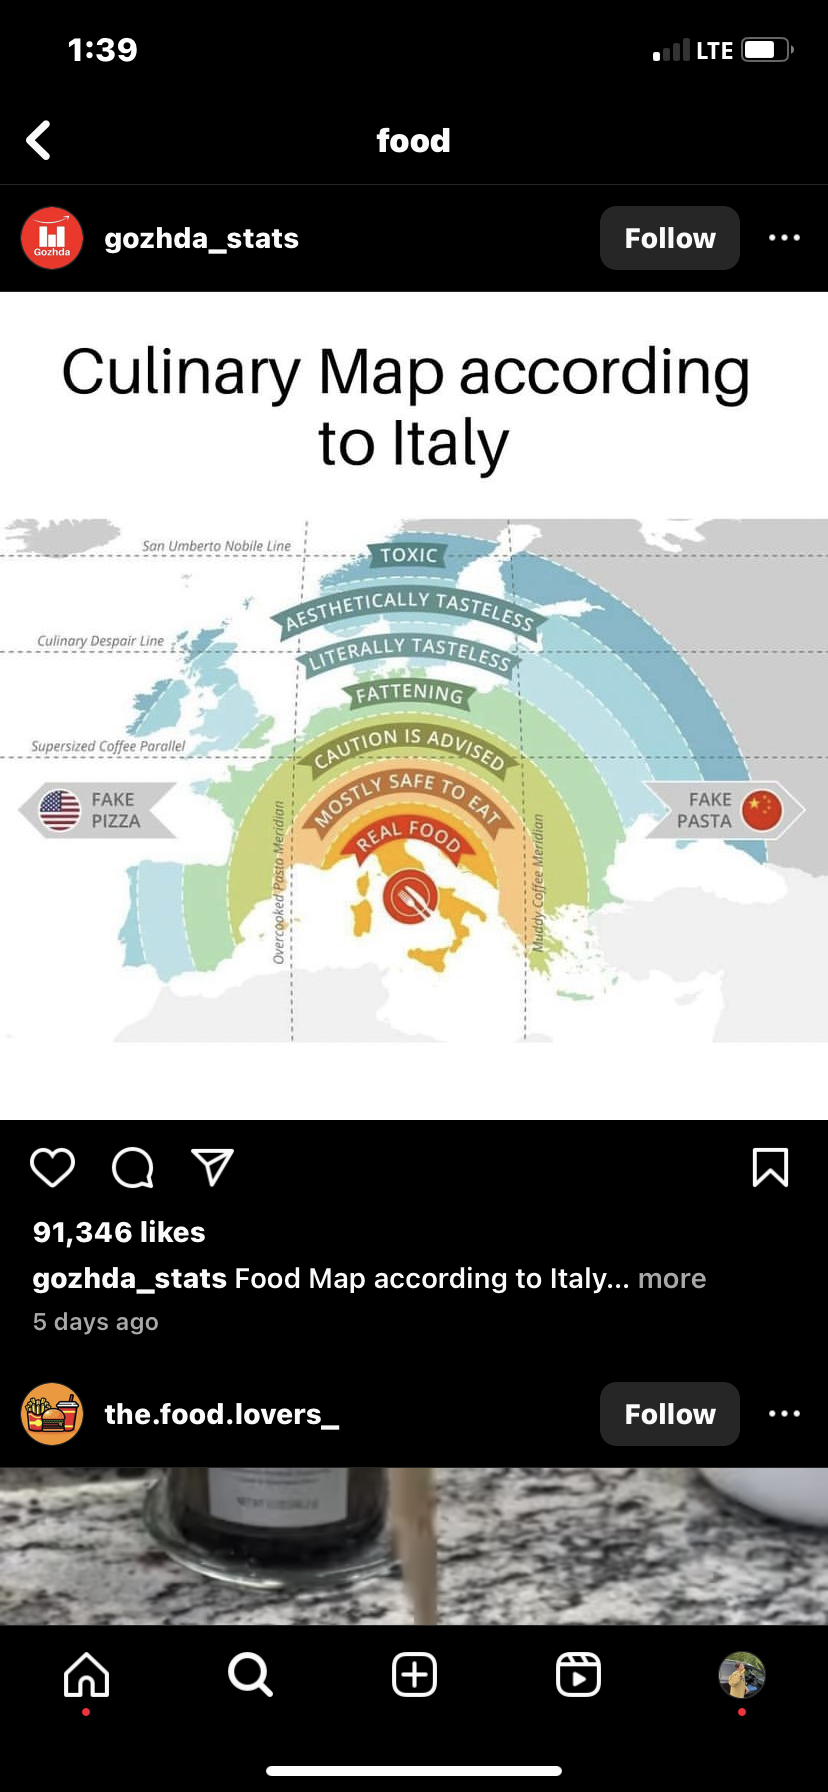 Culinary Map According to Italians